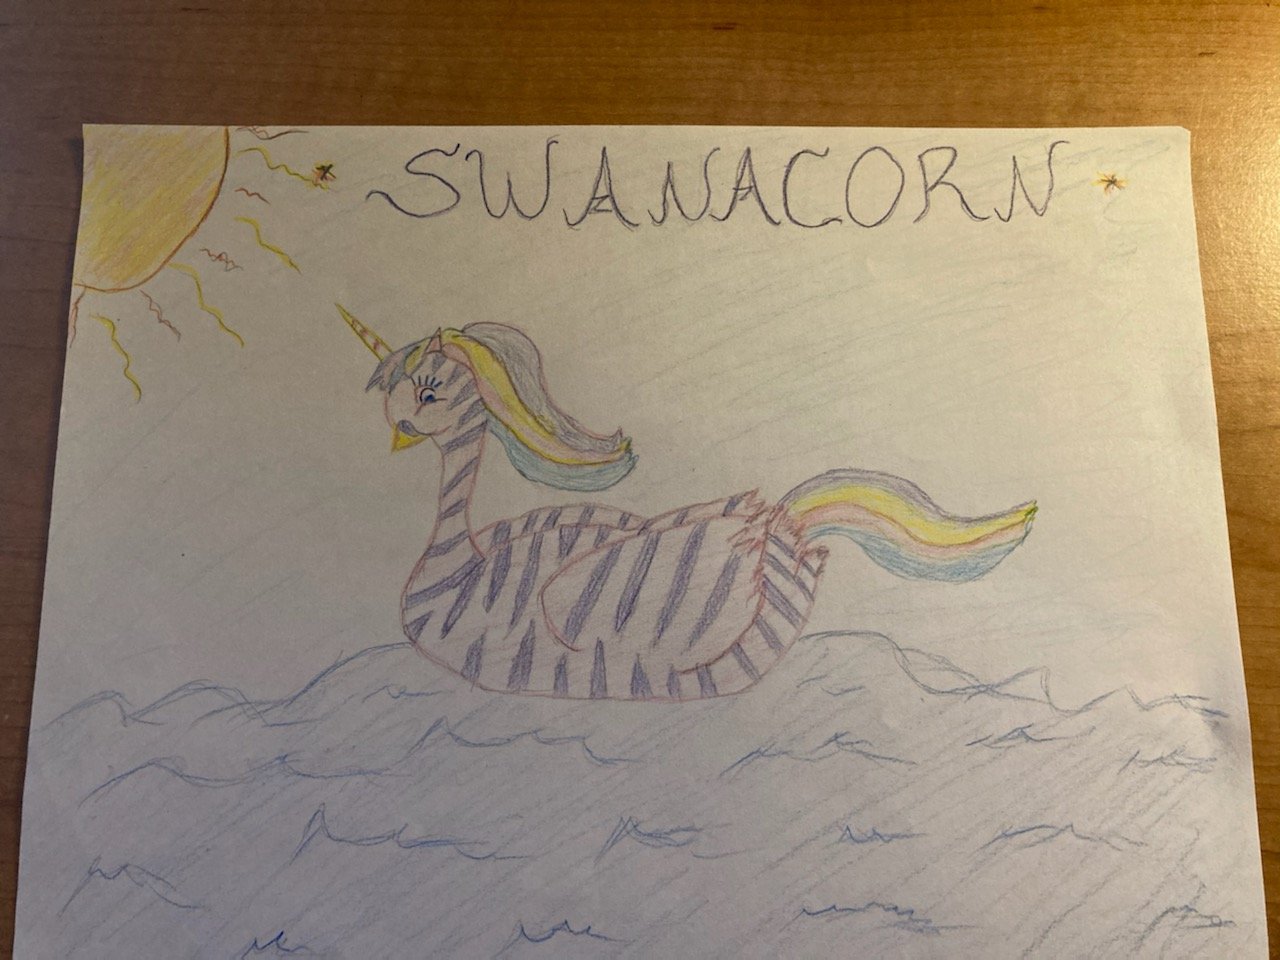 Jessica drew me this and framed it for me, my rare creation swanacorn